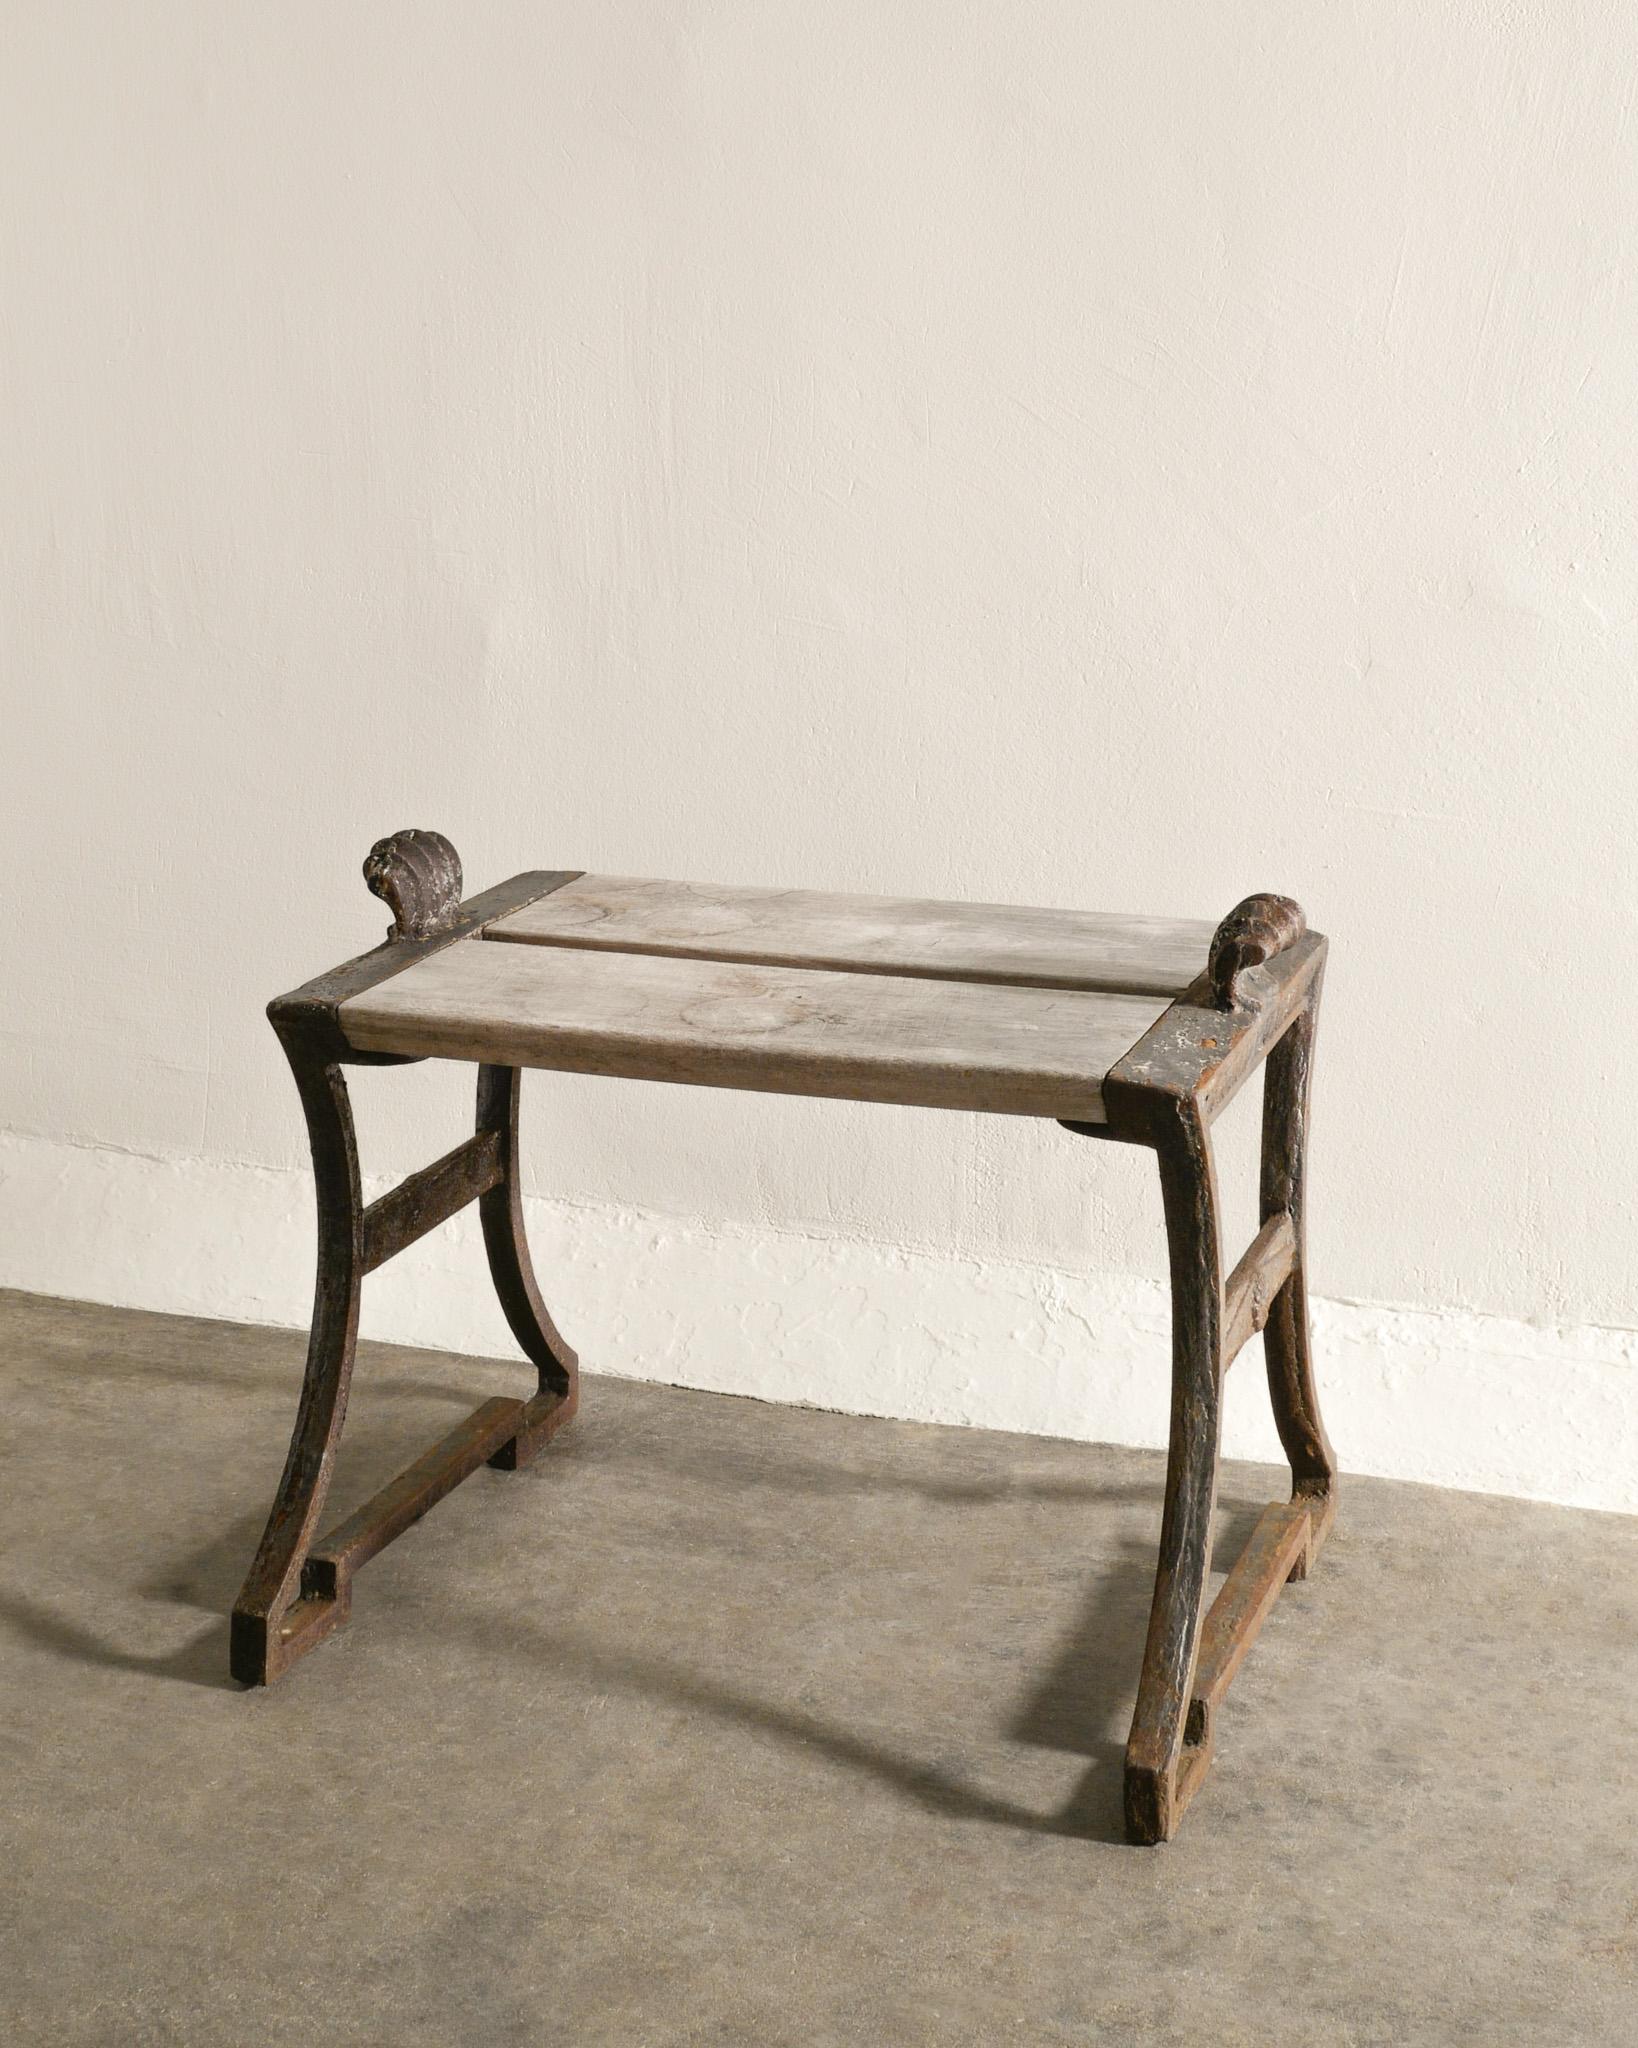 Early 20th Century Folke Bensow Bench in Iron & Wood Produced for Näfveqvarns Bruk in Sweden 1920s